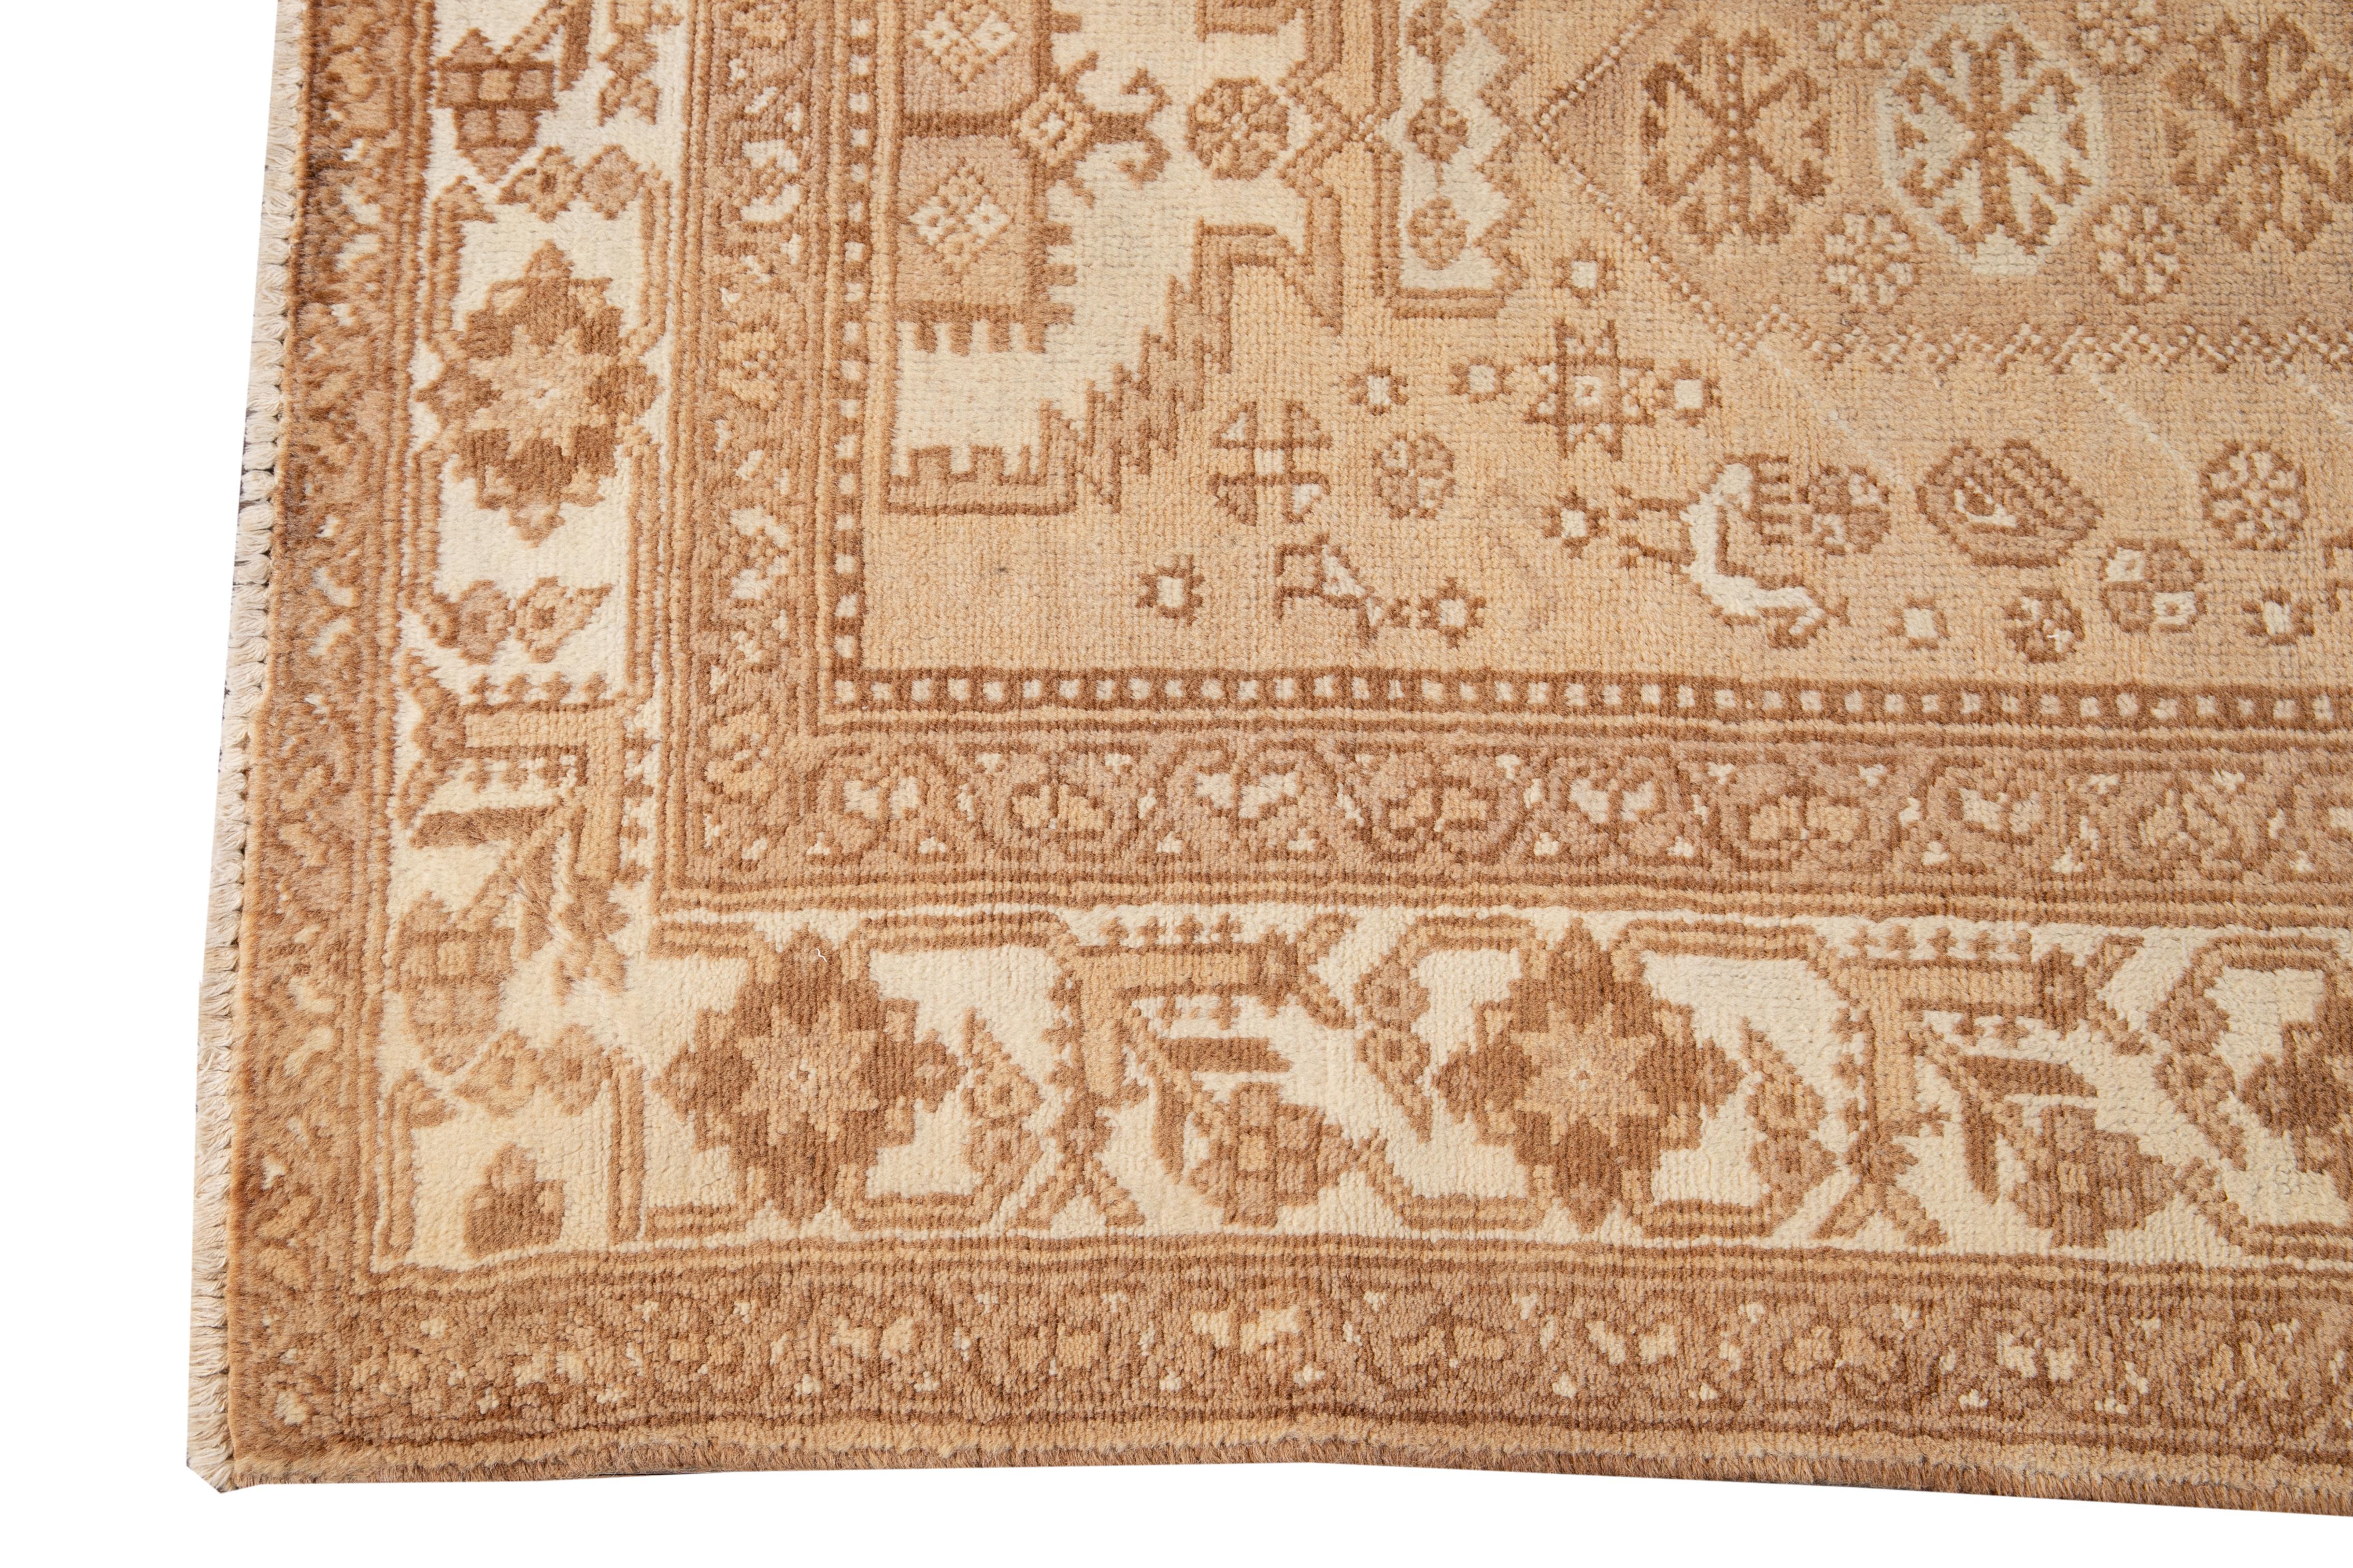 Islamic Vintage Persian Hamadan Wool Rug Handmade With Allover Design In Beige Tan Color For Sale